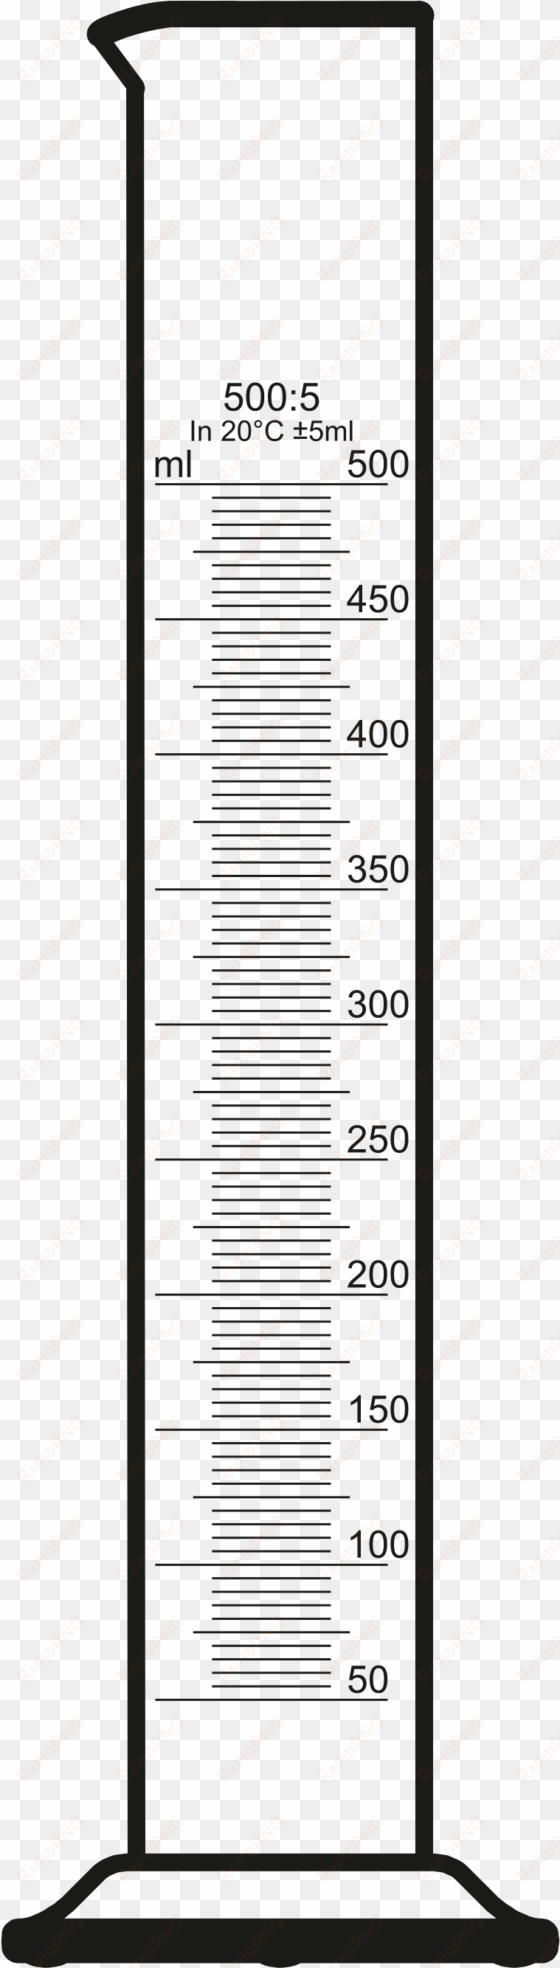 open - 100 ml graduated cylinder drawing